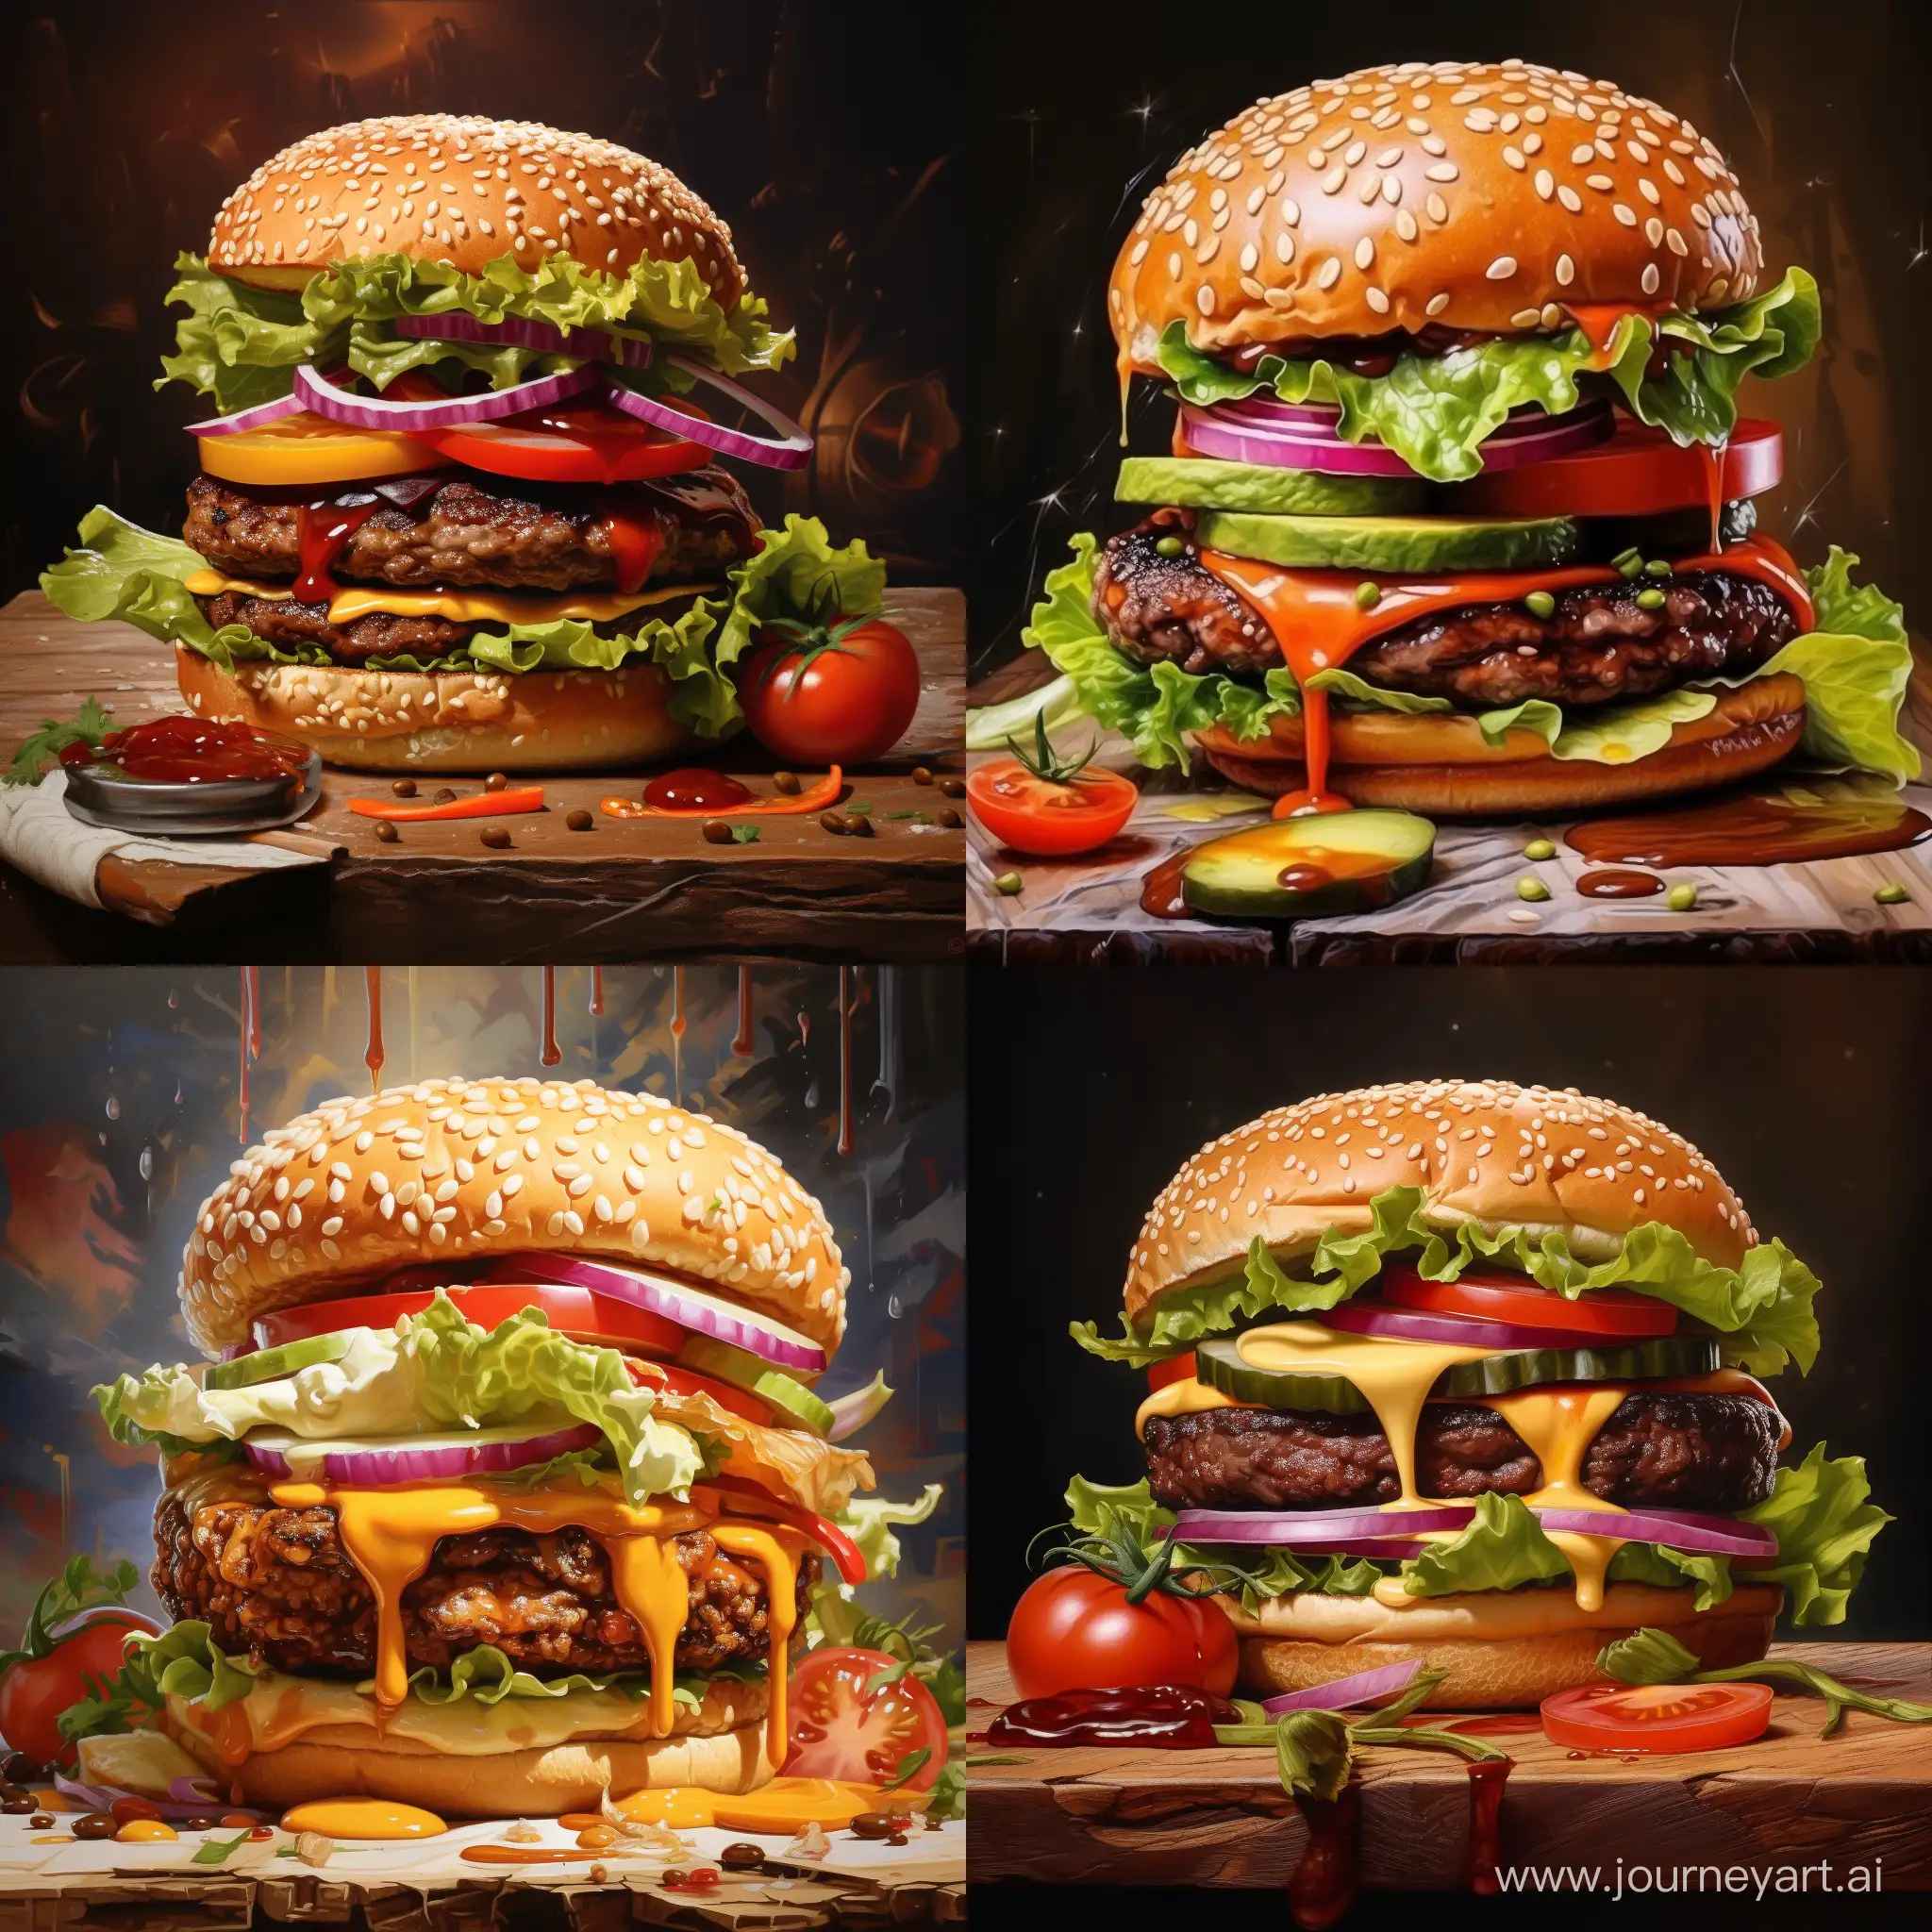 Savor-the-Artistry-3D-Animation-of-a-Delectable-Burger-in-Oil-Painting-Style